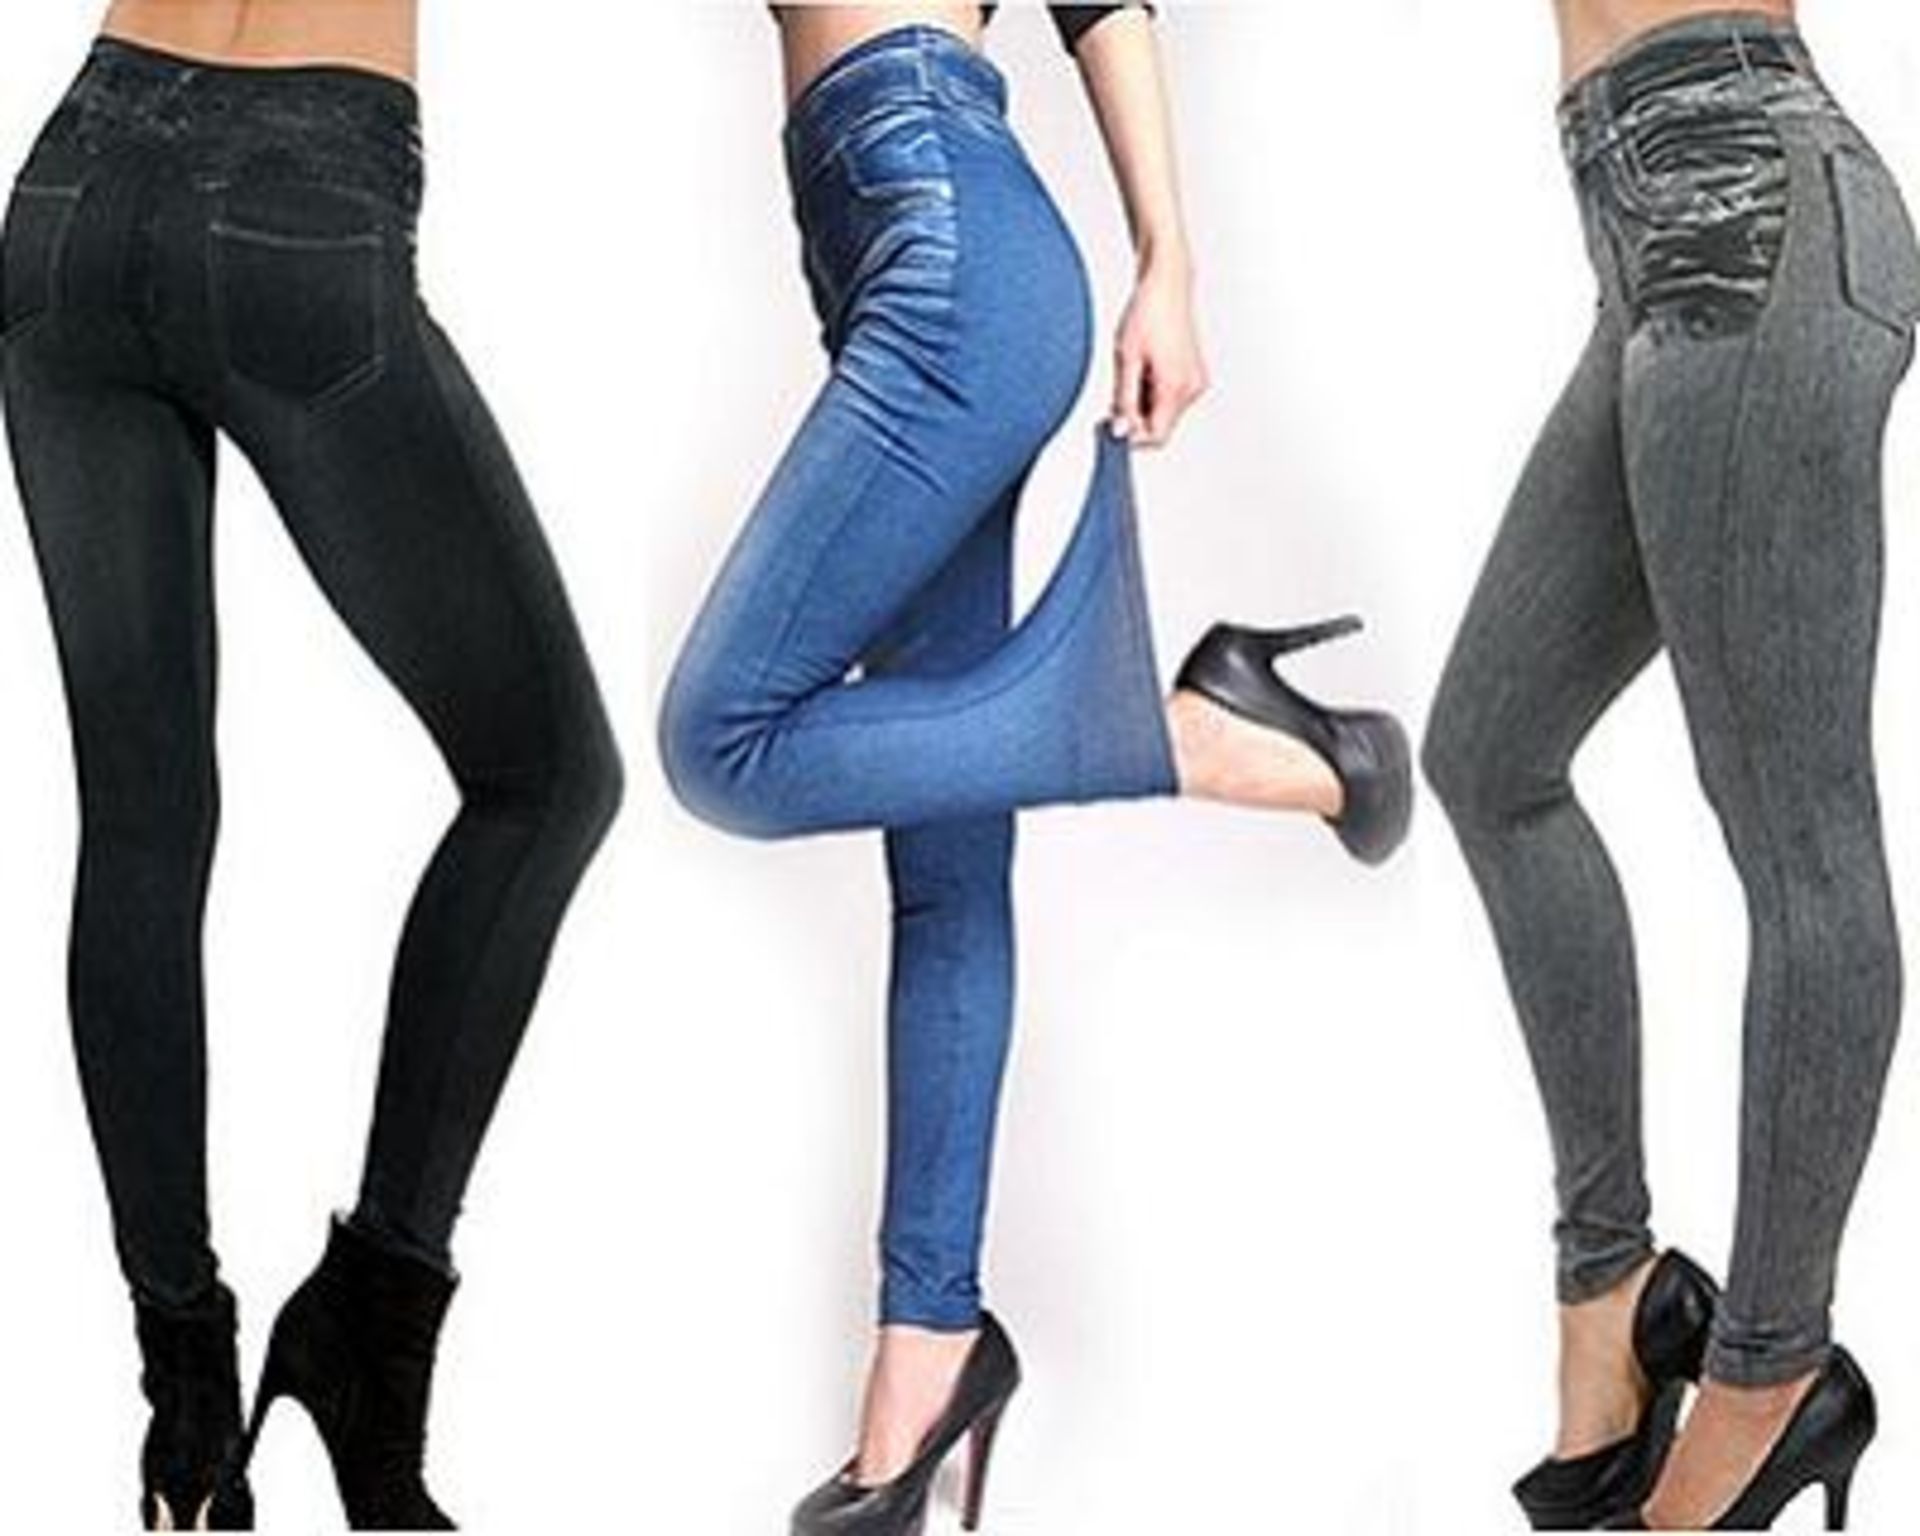 V *TRADE QTY* Brand New Three Pairs of Capri Leggings Size 14-16(L) - The look of designer jeans/